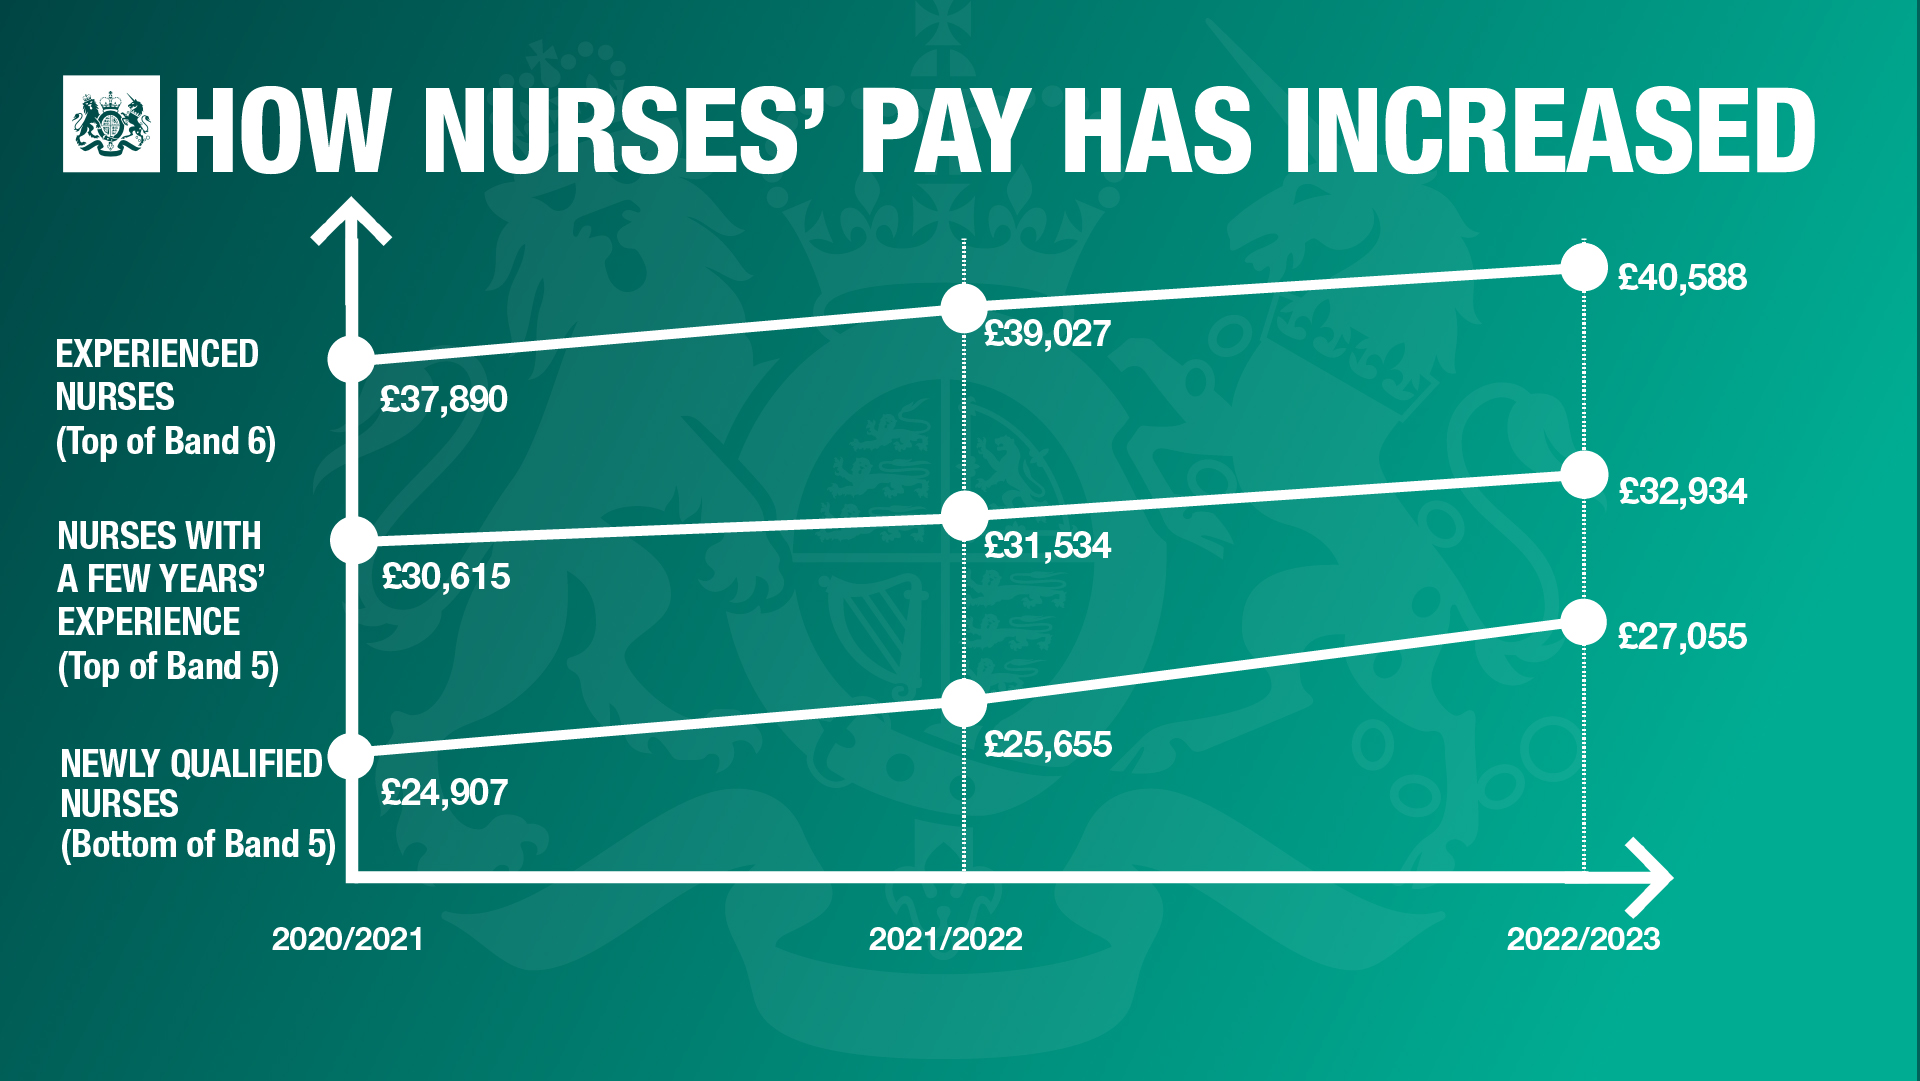 A graphic showing how nurses' pay has increased.

Experienced nurses (top of Band 6). 2020/2021 £37,890. 2021/2022 £39,027. 2022/2023 £40,588.

Nurses with a few years' experience (top of Band 5). 2020/2021 £30,615. 2021/2022 £31,534. 2022/2023 £32,934.

Newly qualified nurses (bottom of Band 5). 2020/2021 £24,907. 2021/2022 £25,655. 2022/2023 £27,055.